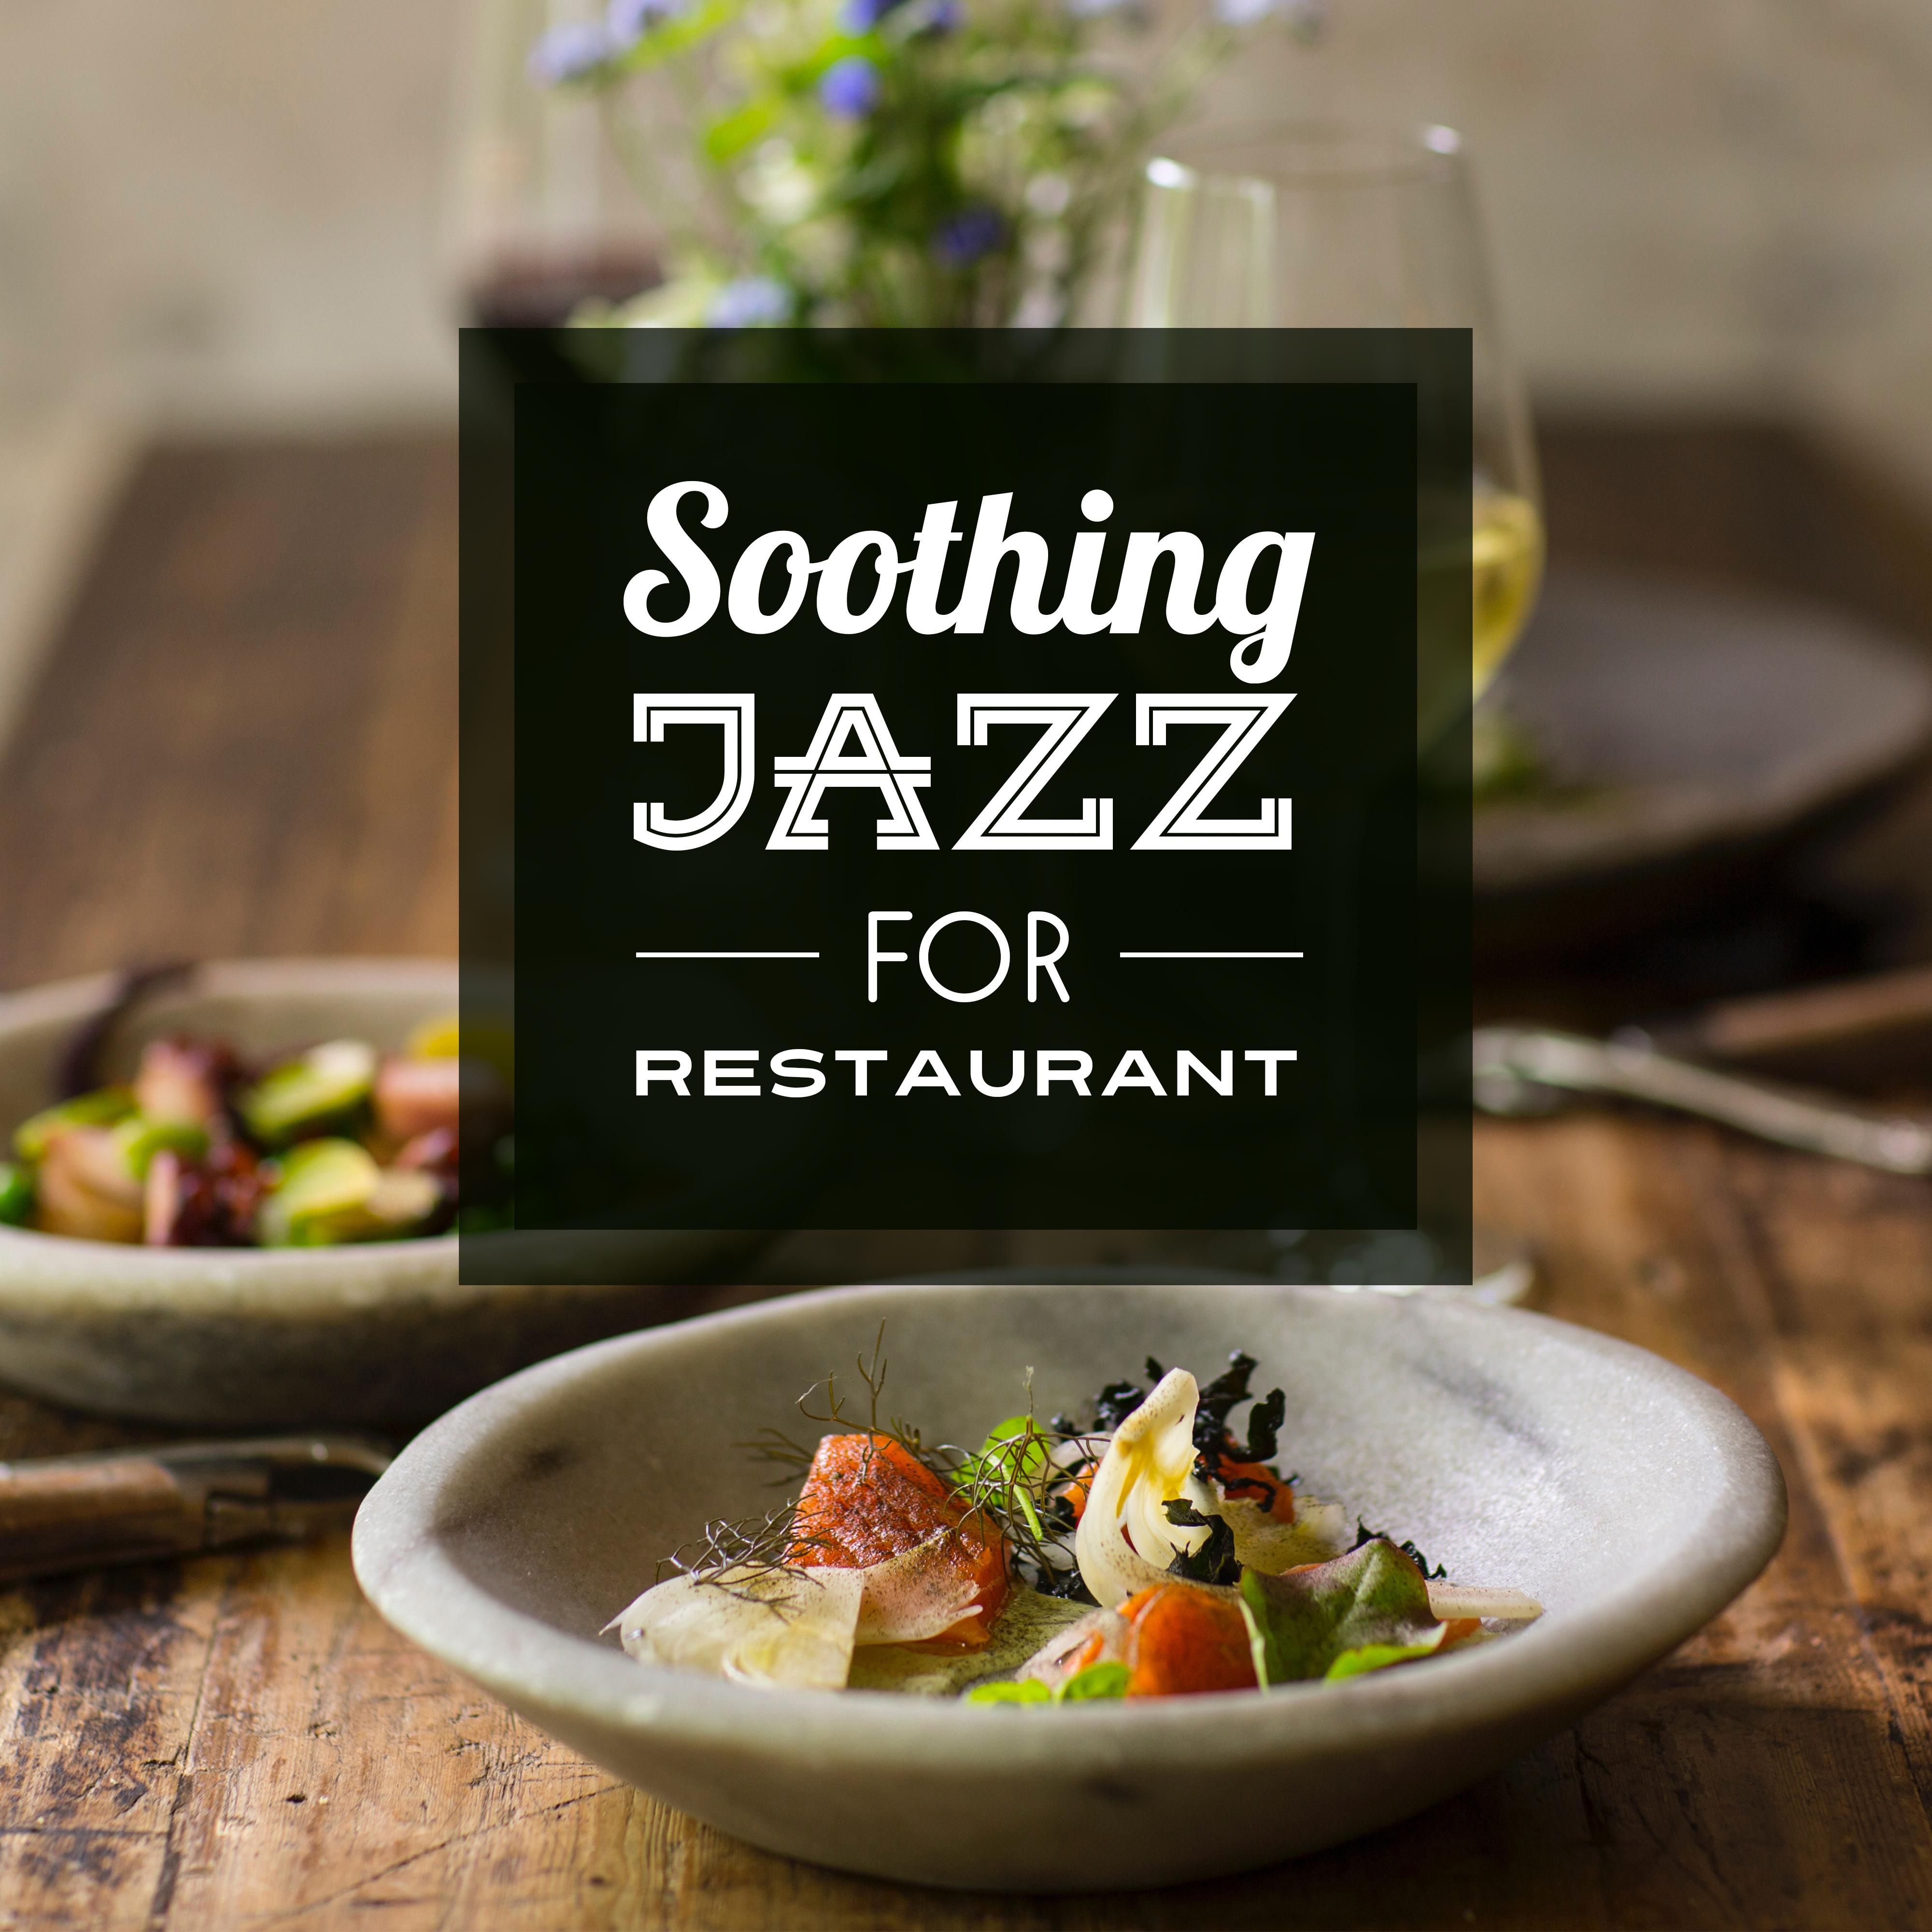 Soothing Jazz for Restaurant